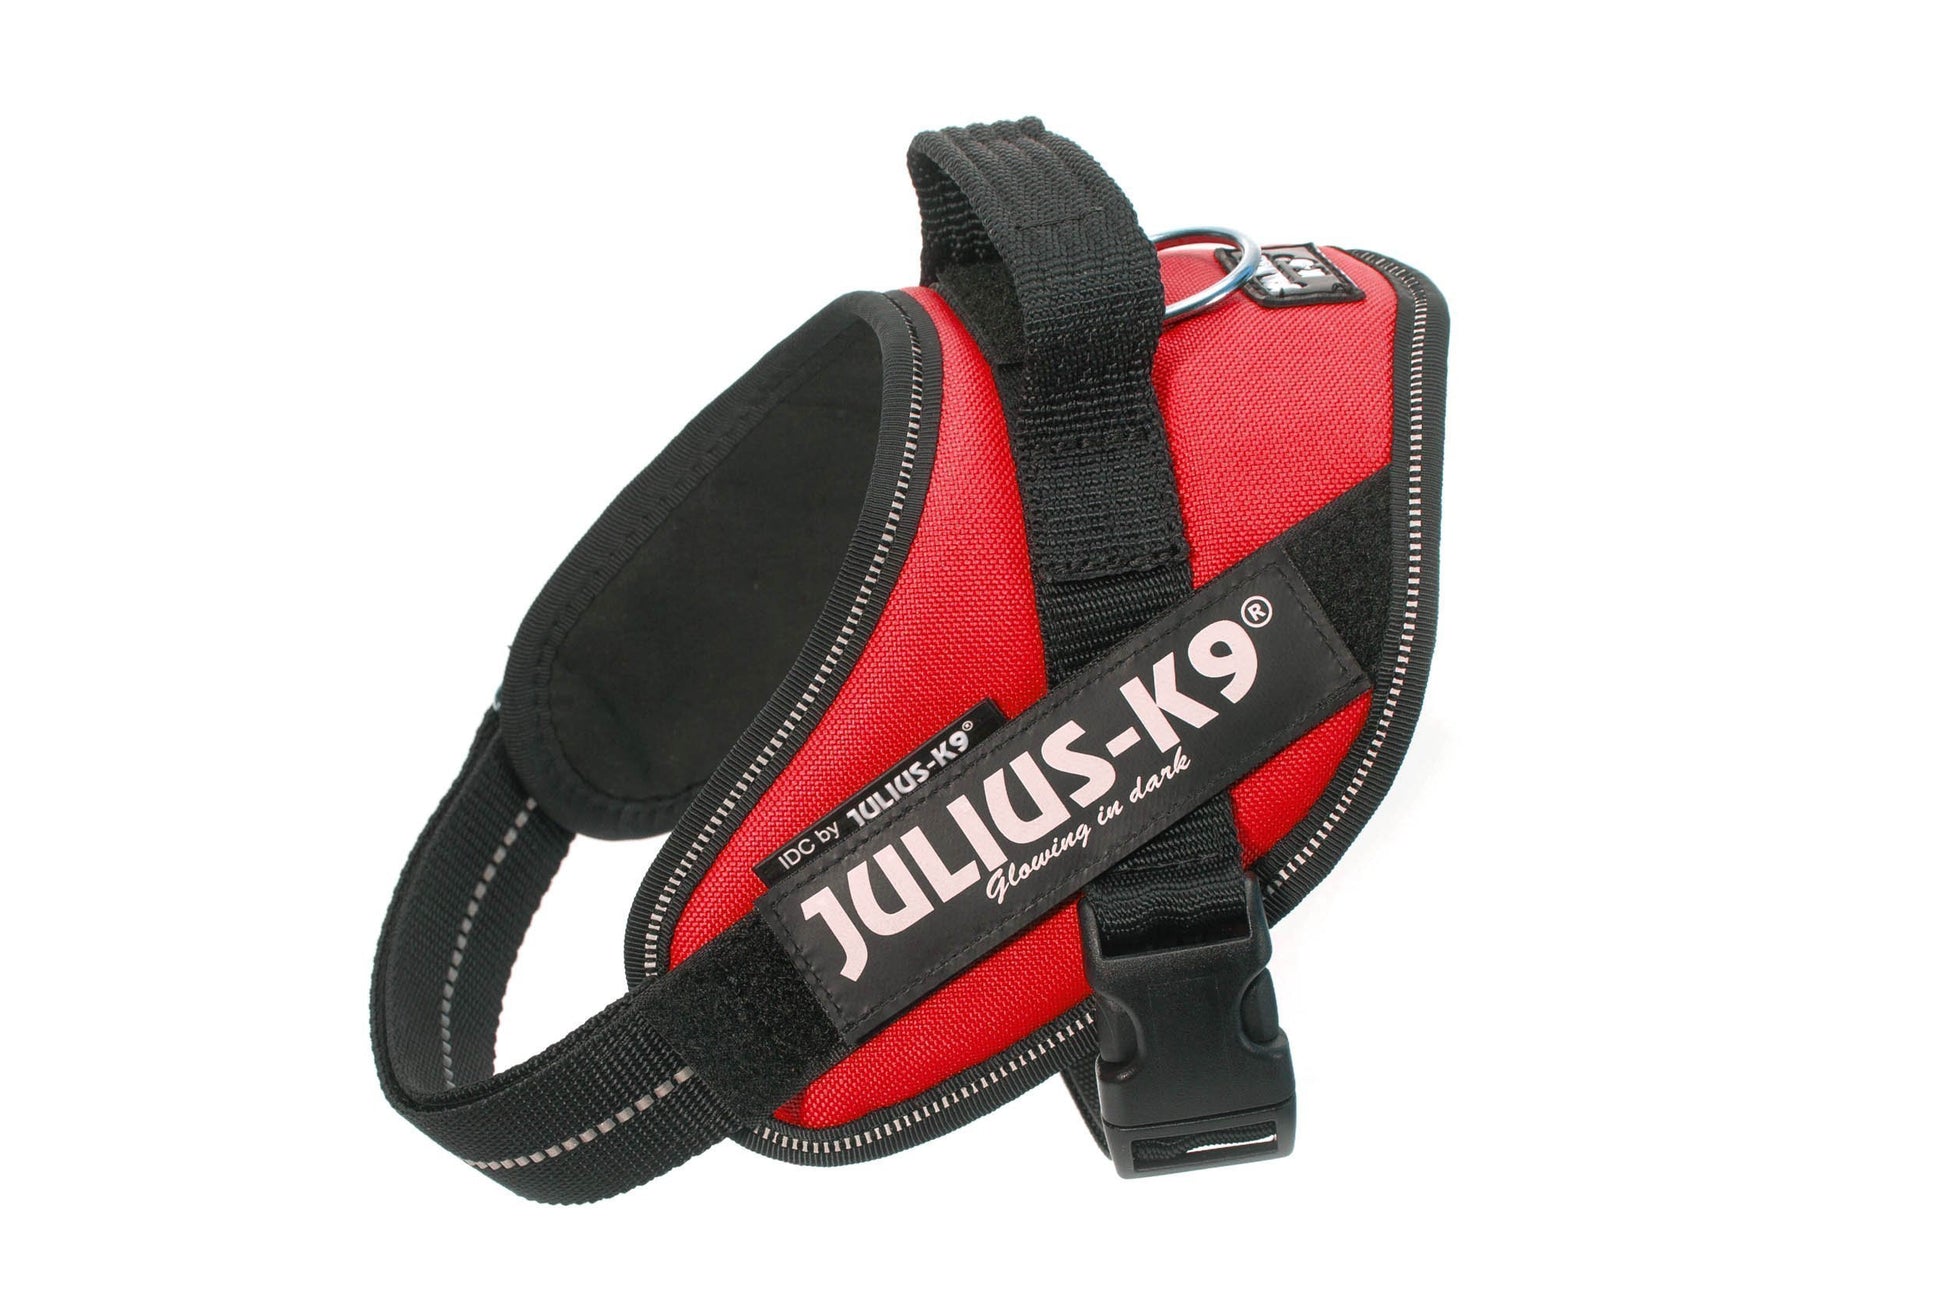 Try Tickless with the best Julius-K9 IDC Powerharnesses in the World! - TicklessUSA